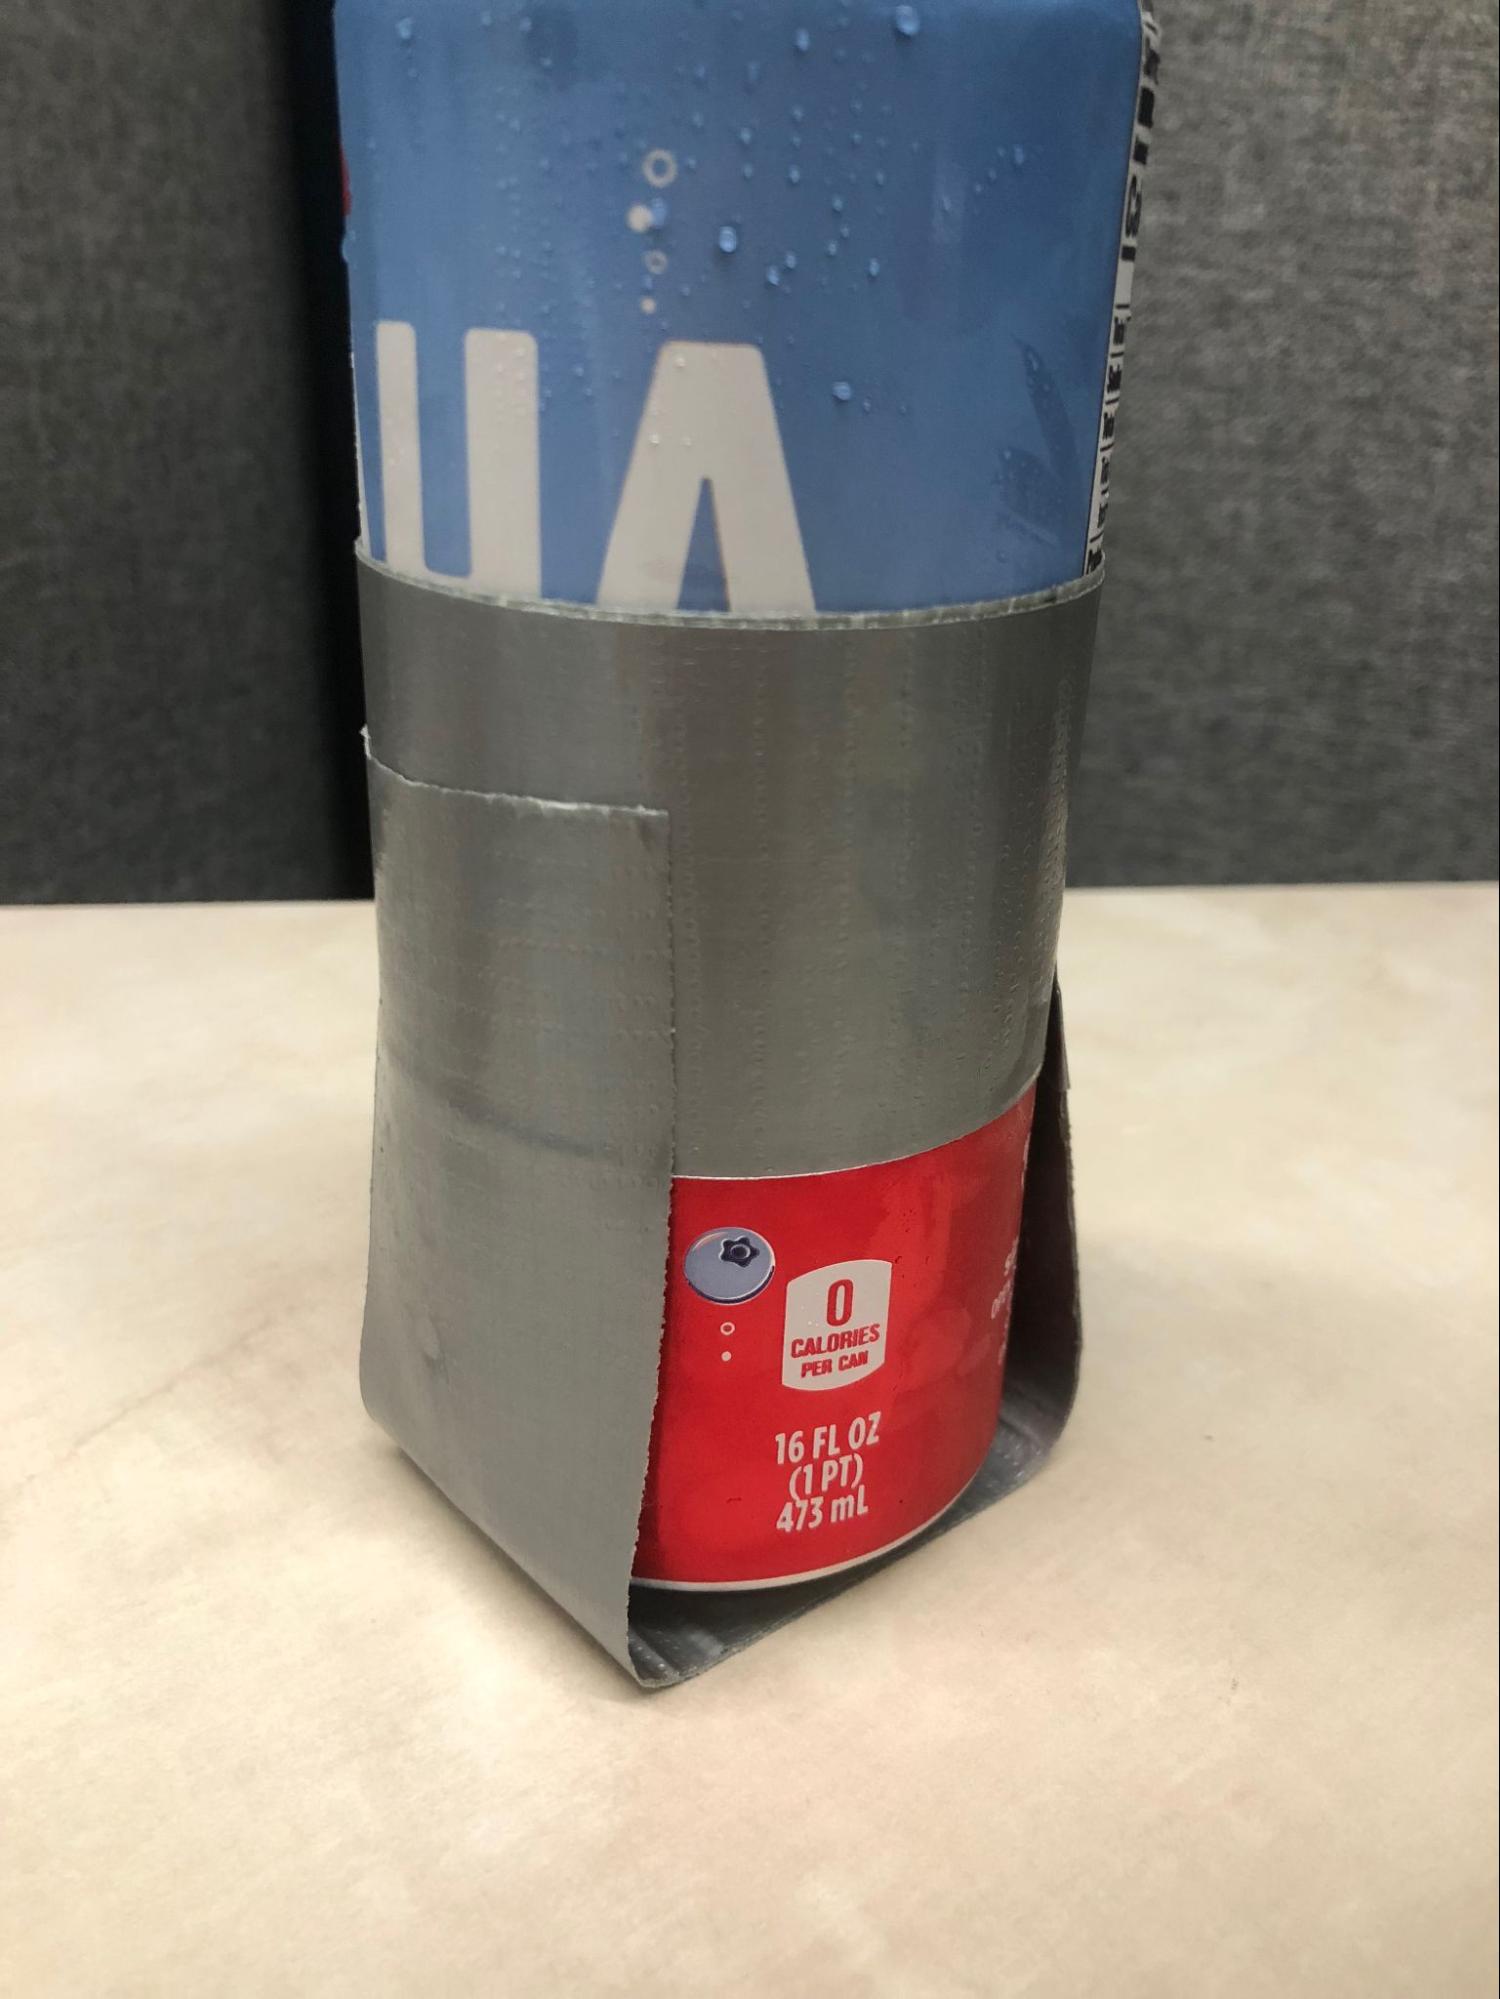 tape around the can